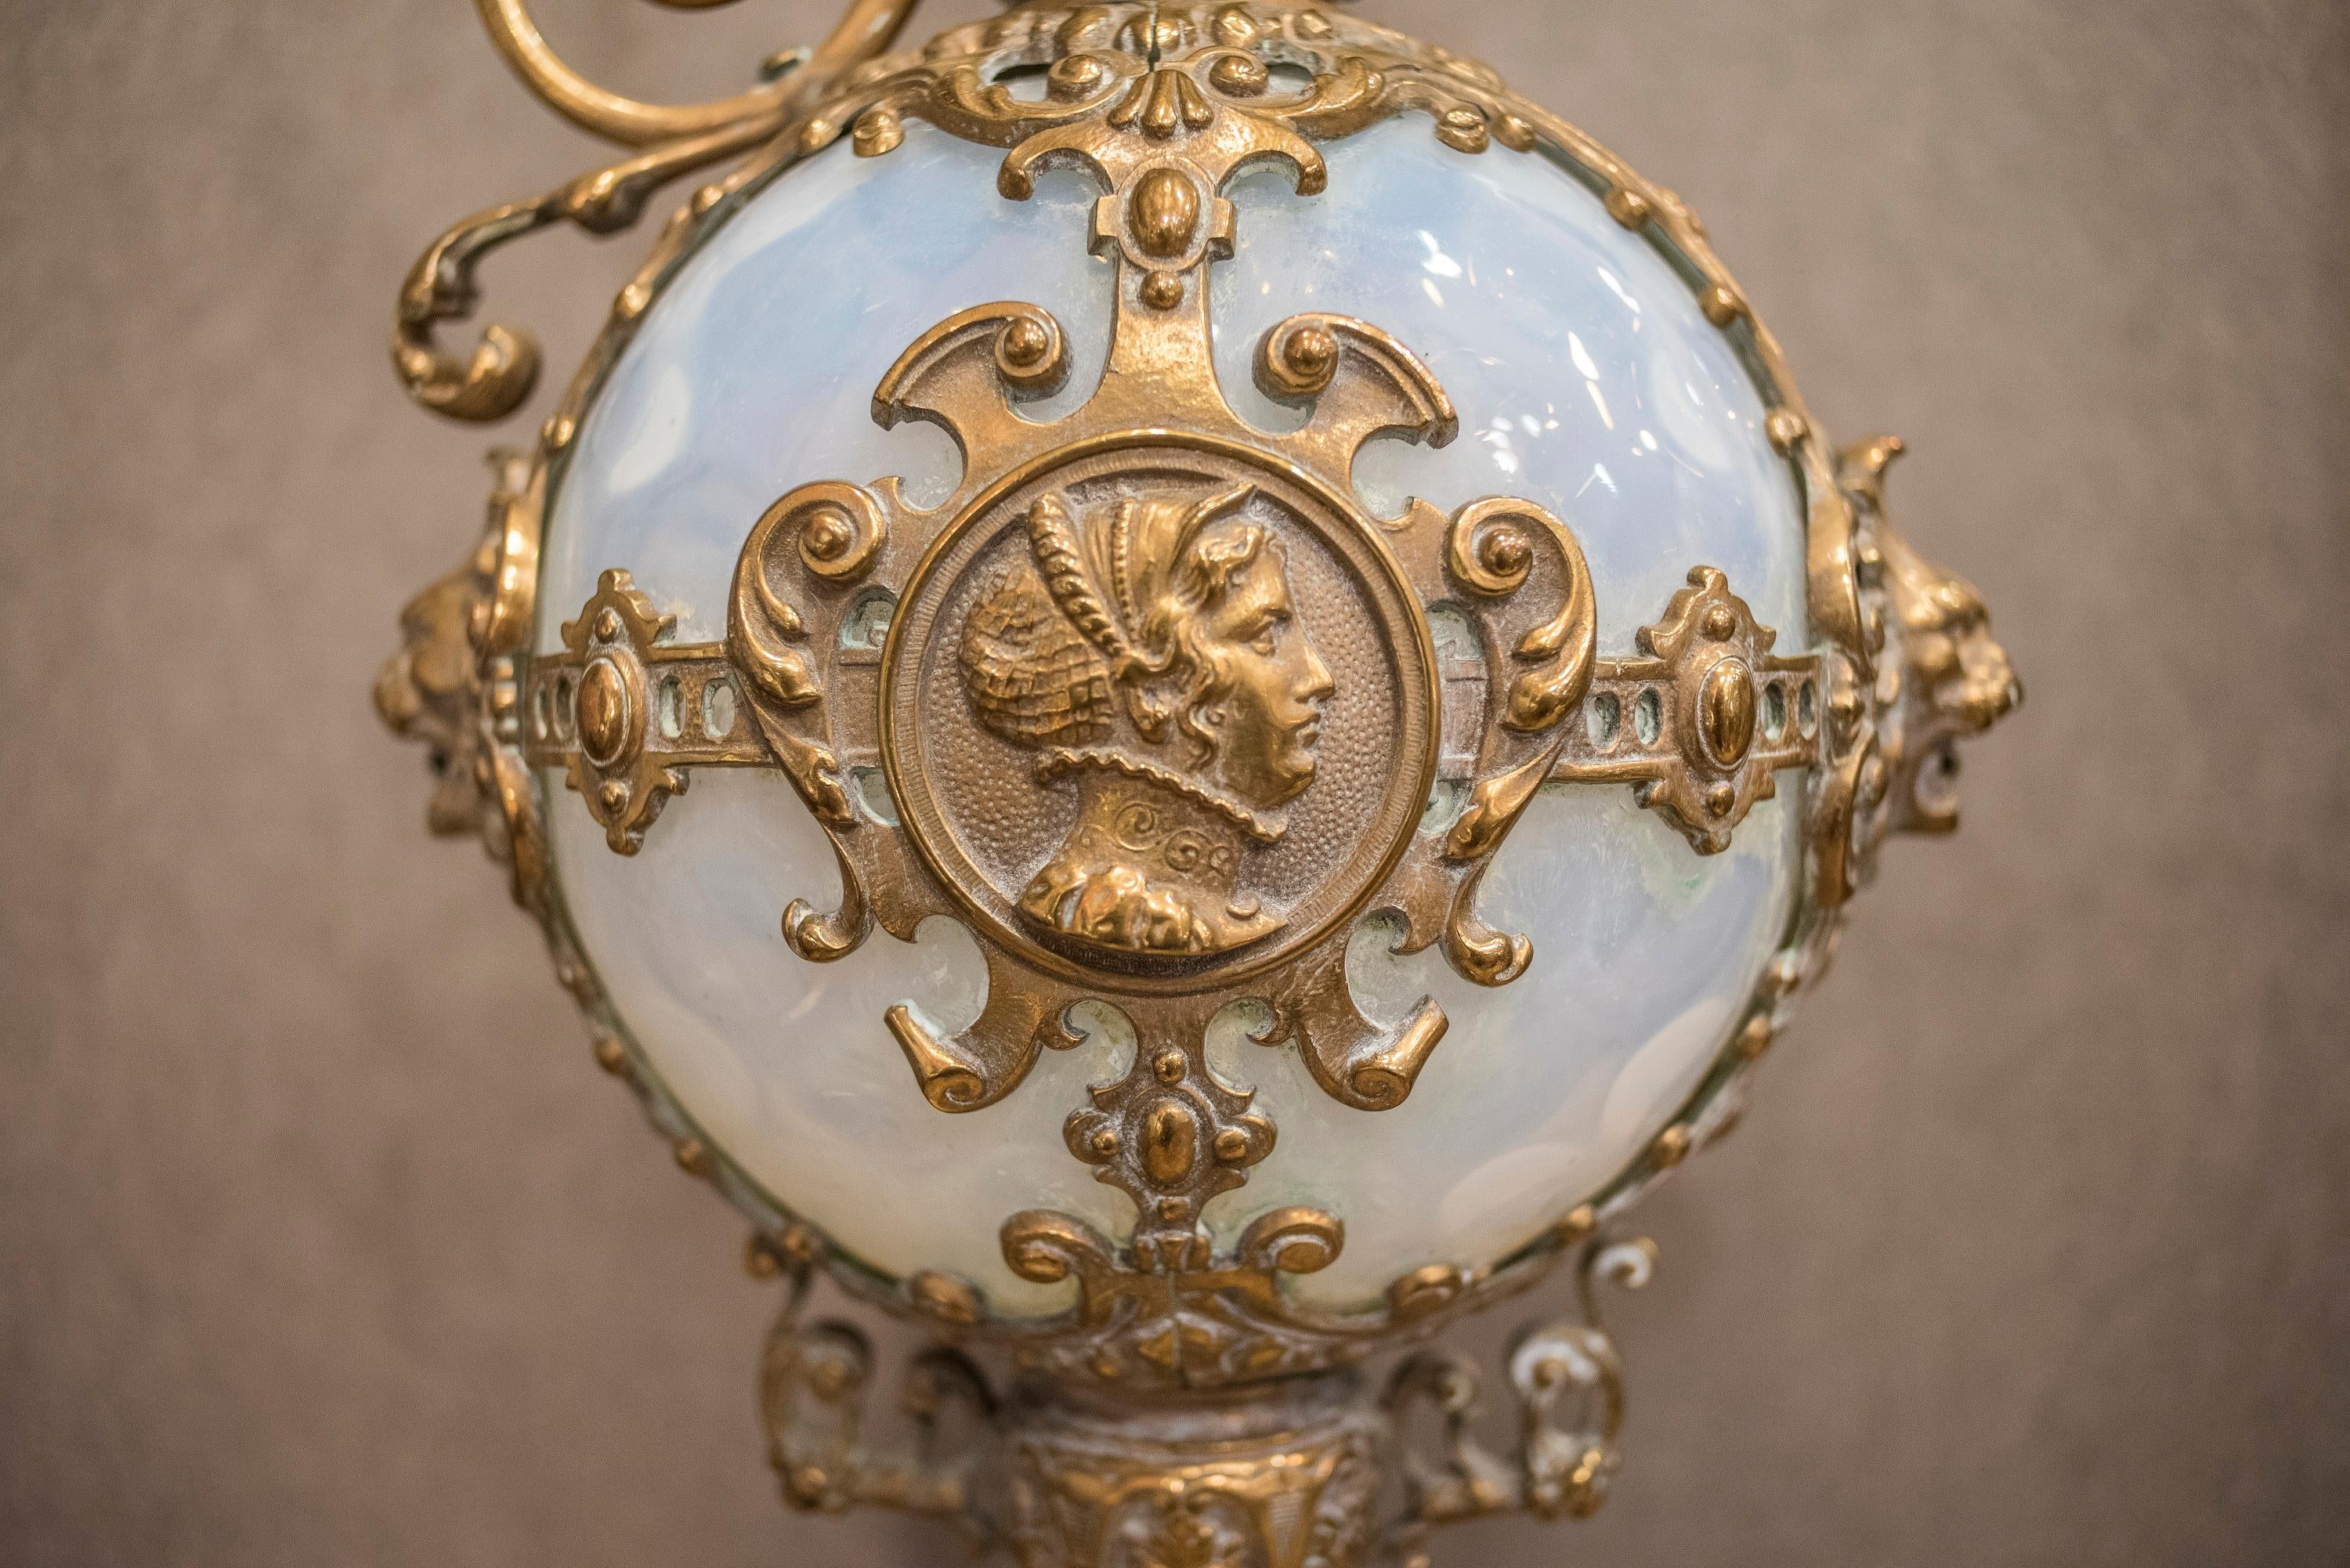 One of a kind 19th century, golden bronze (ormolu) and opaline white glass Spanish baroque style Amphore. With a medallion on the obverse with a female portrait and an other
medallion on the reverse with a male portrait, all worked on the